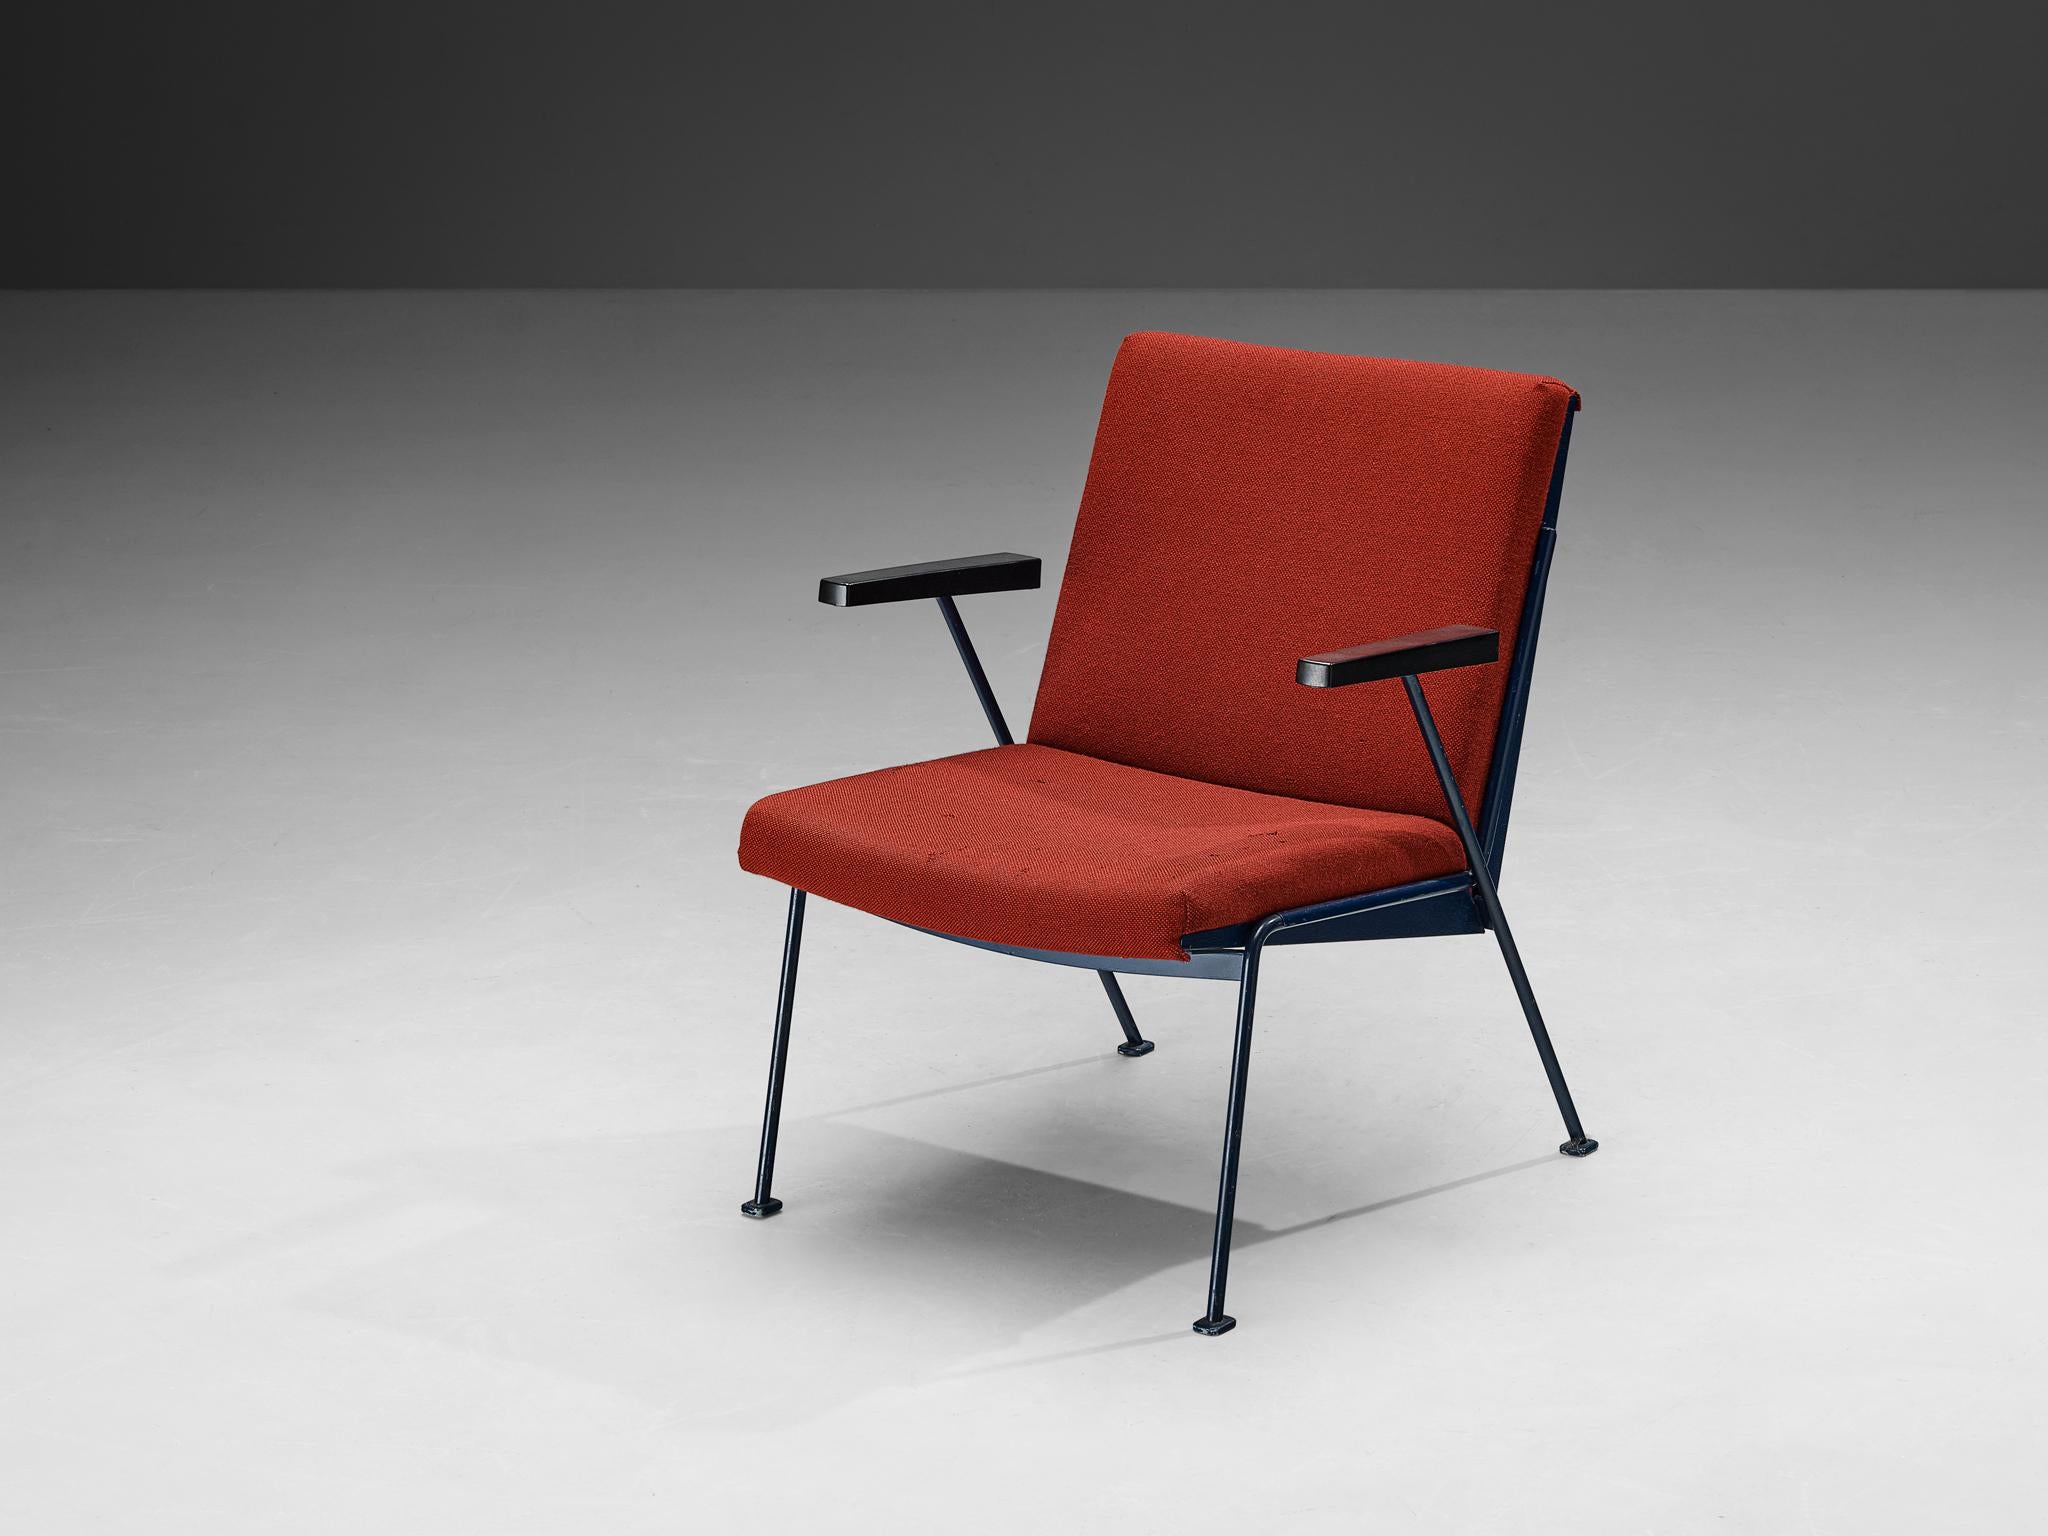 Wim Rietveld for Ahrend De Cirkel, 'Oase' lounge chair, bakelite, lacquered steel, fabric, The Netherlands, 1950s.

This very sculptural Oase chair was created by Dutch designer Wim Rietveld for Ahrend De Cirkel. This comfortable chair is attractive